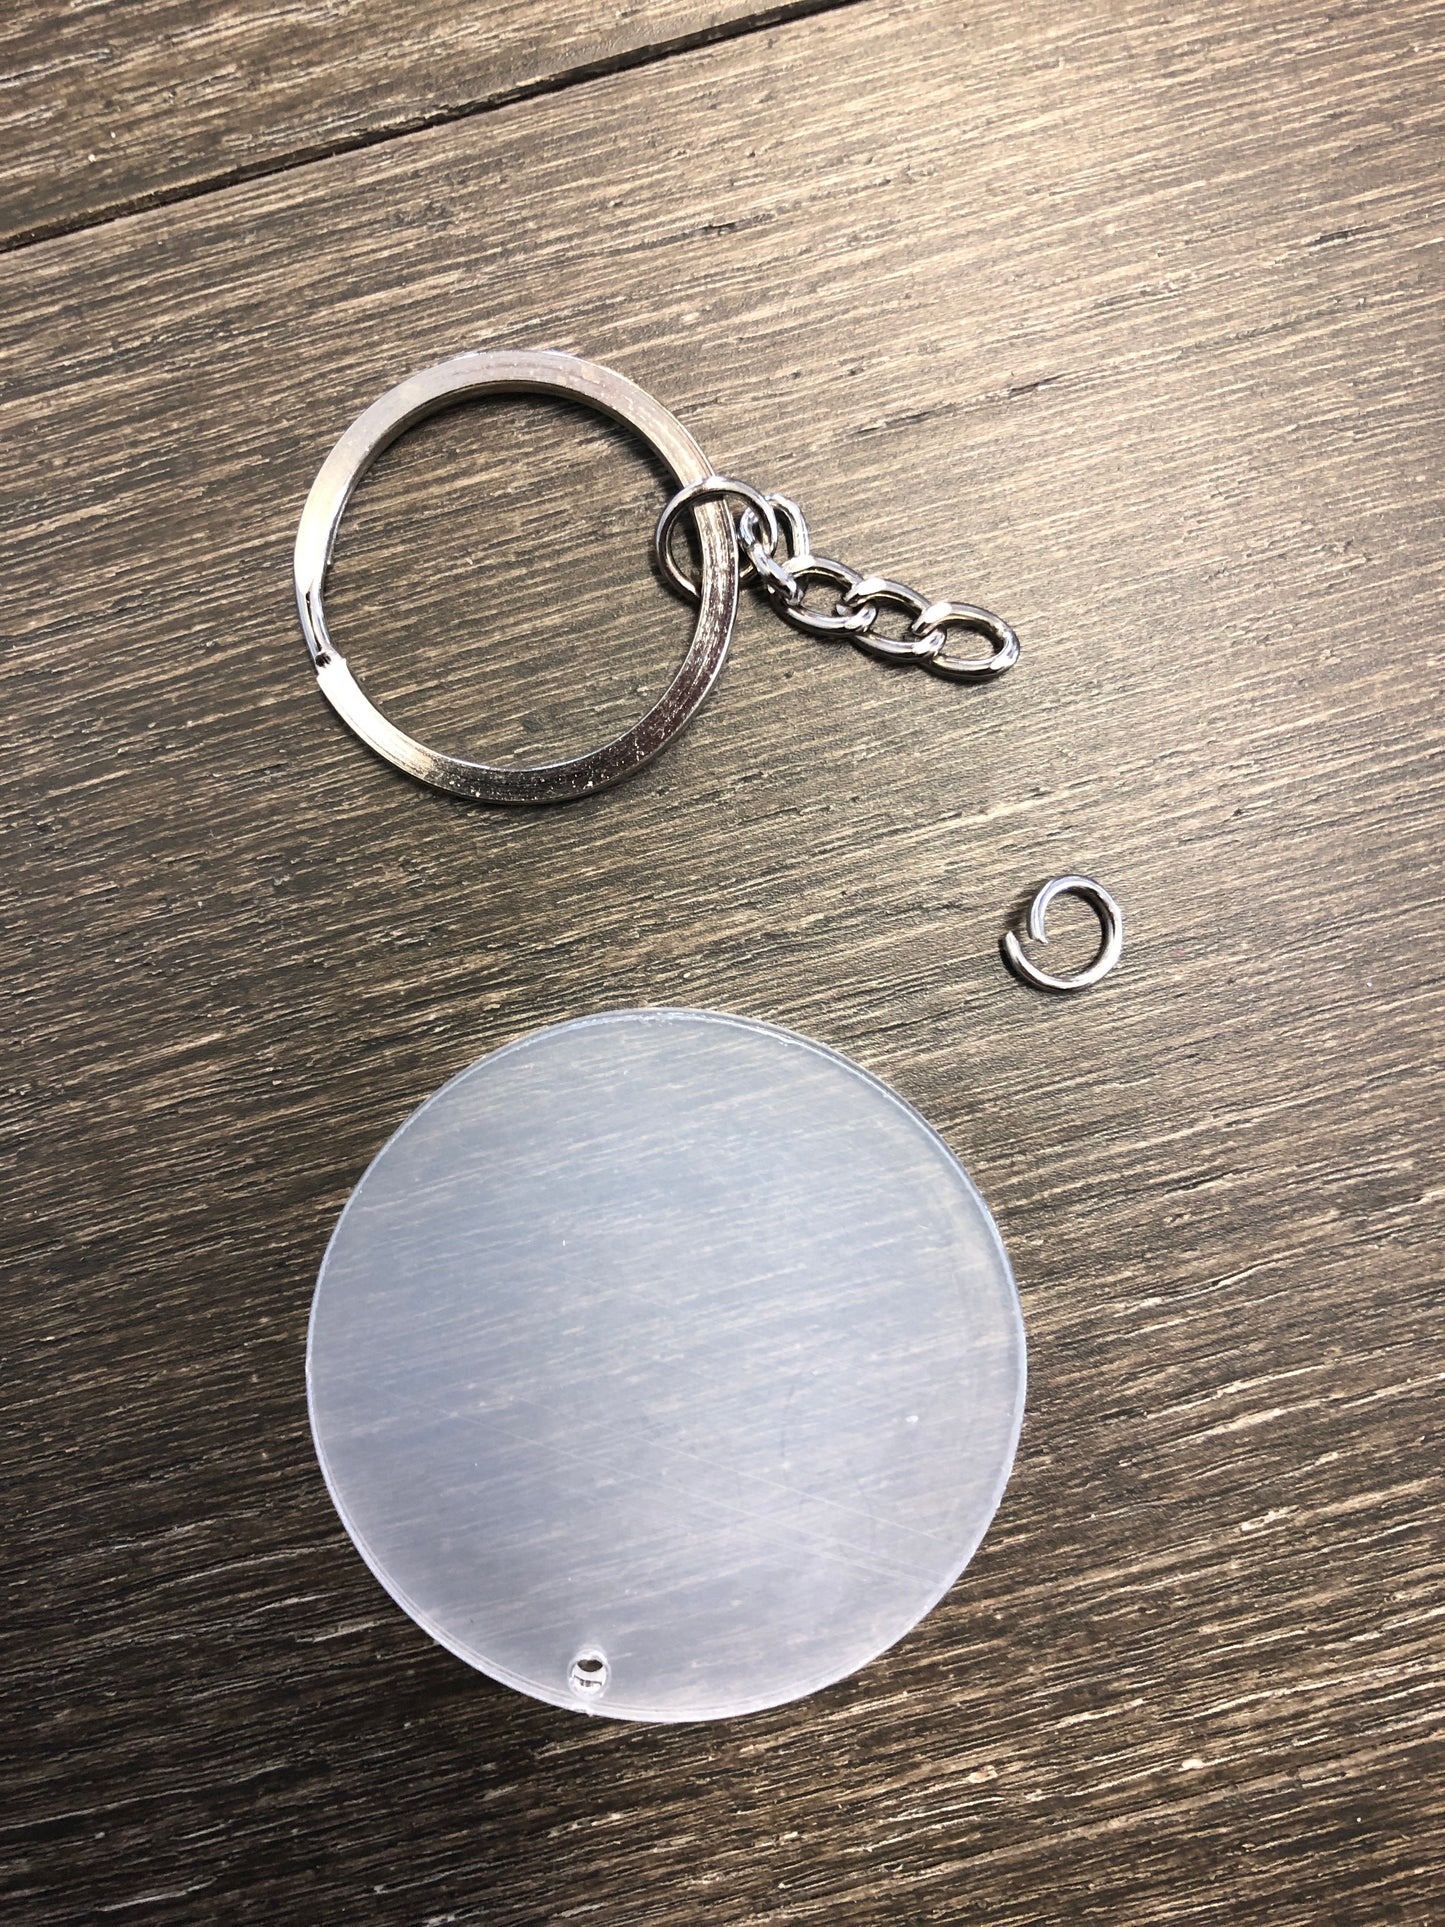 2" Acrylic Disk With KeyRing Chain and Jump Ring